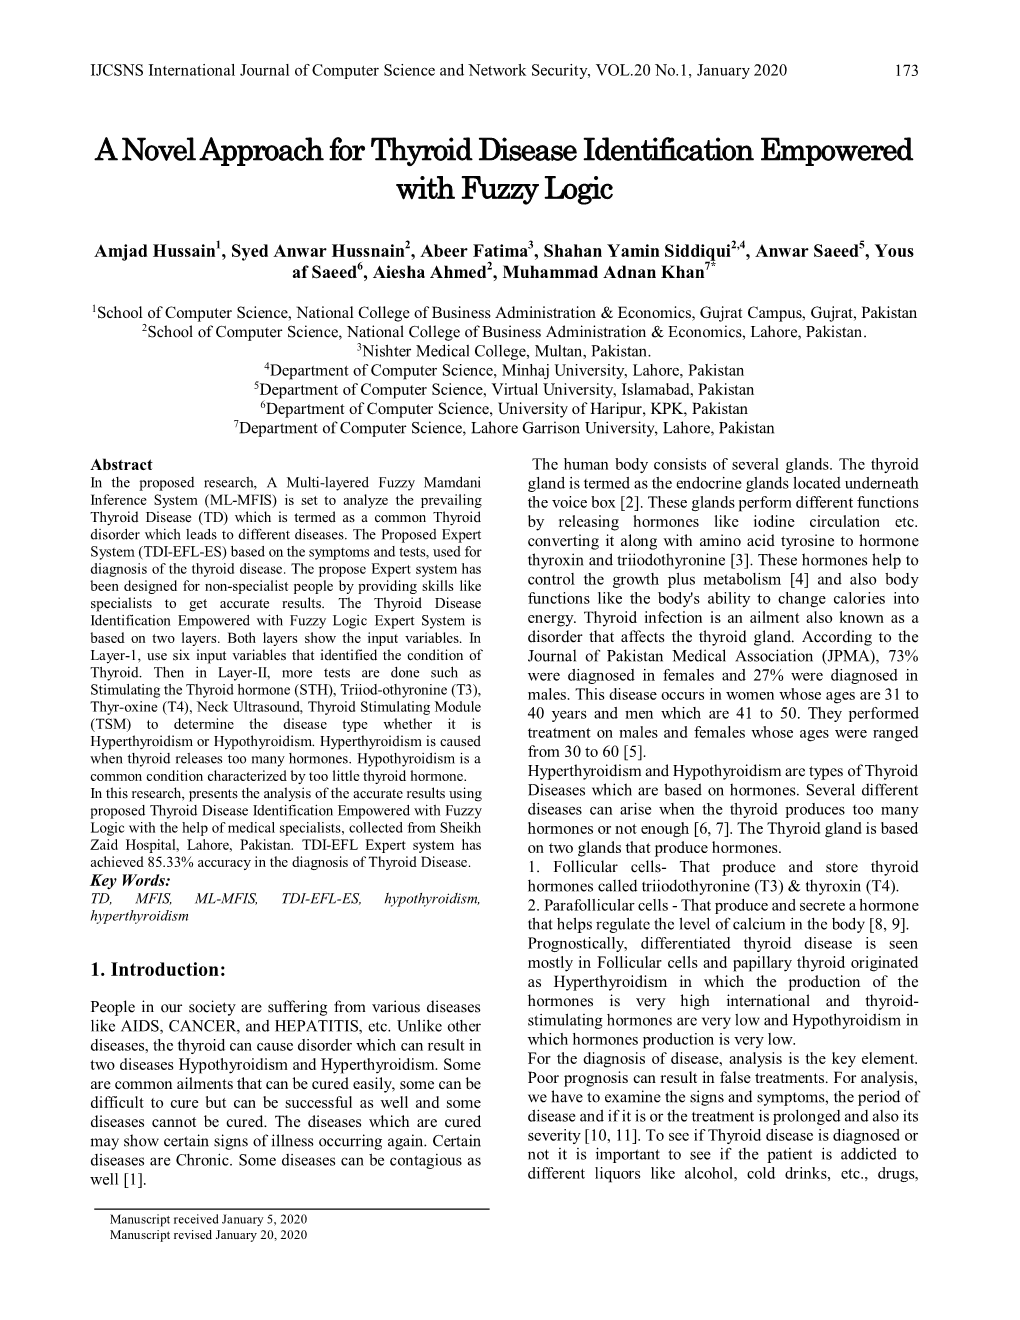 A Novel Approach for Thyroid Disease Identification Empowered with Fuzzy Logic